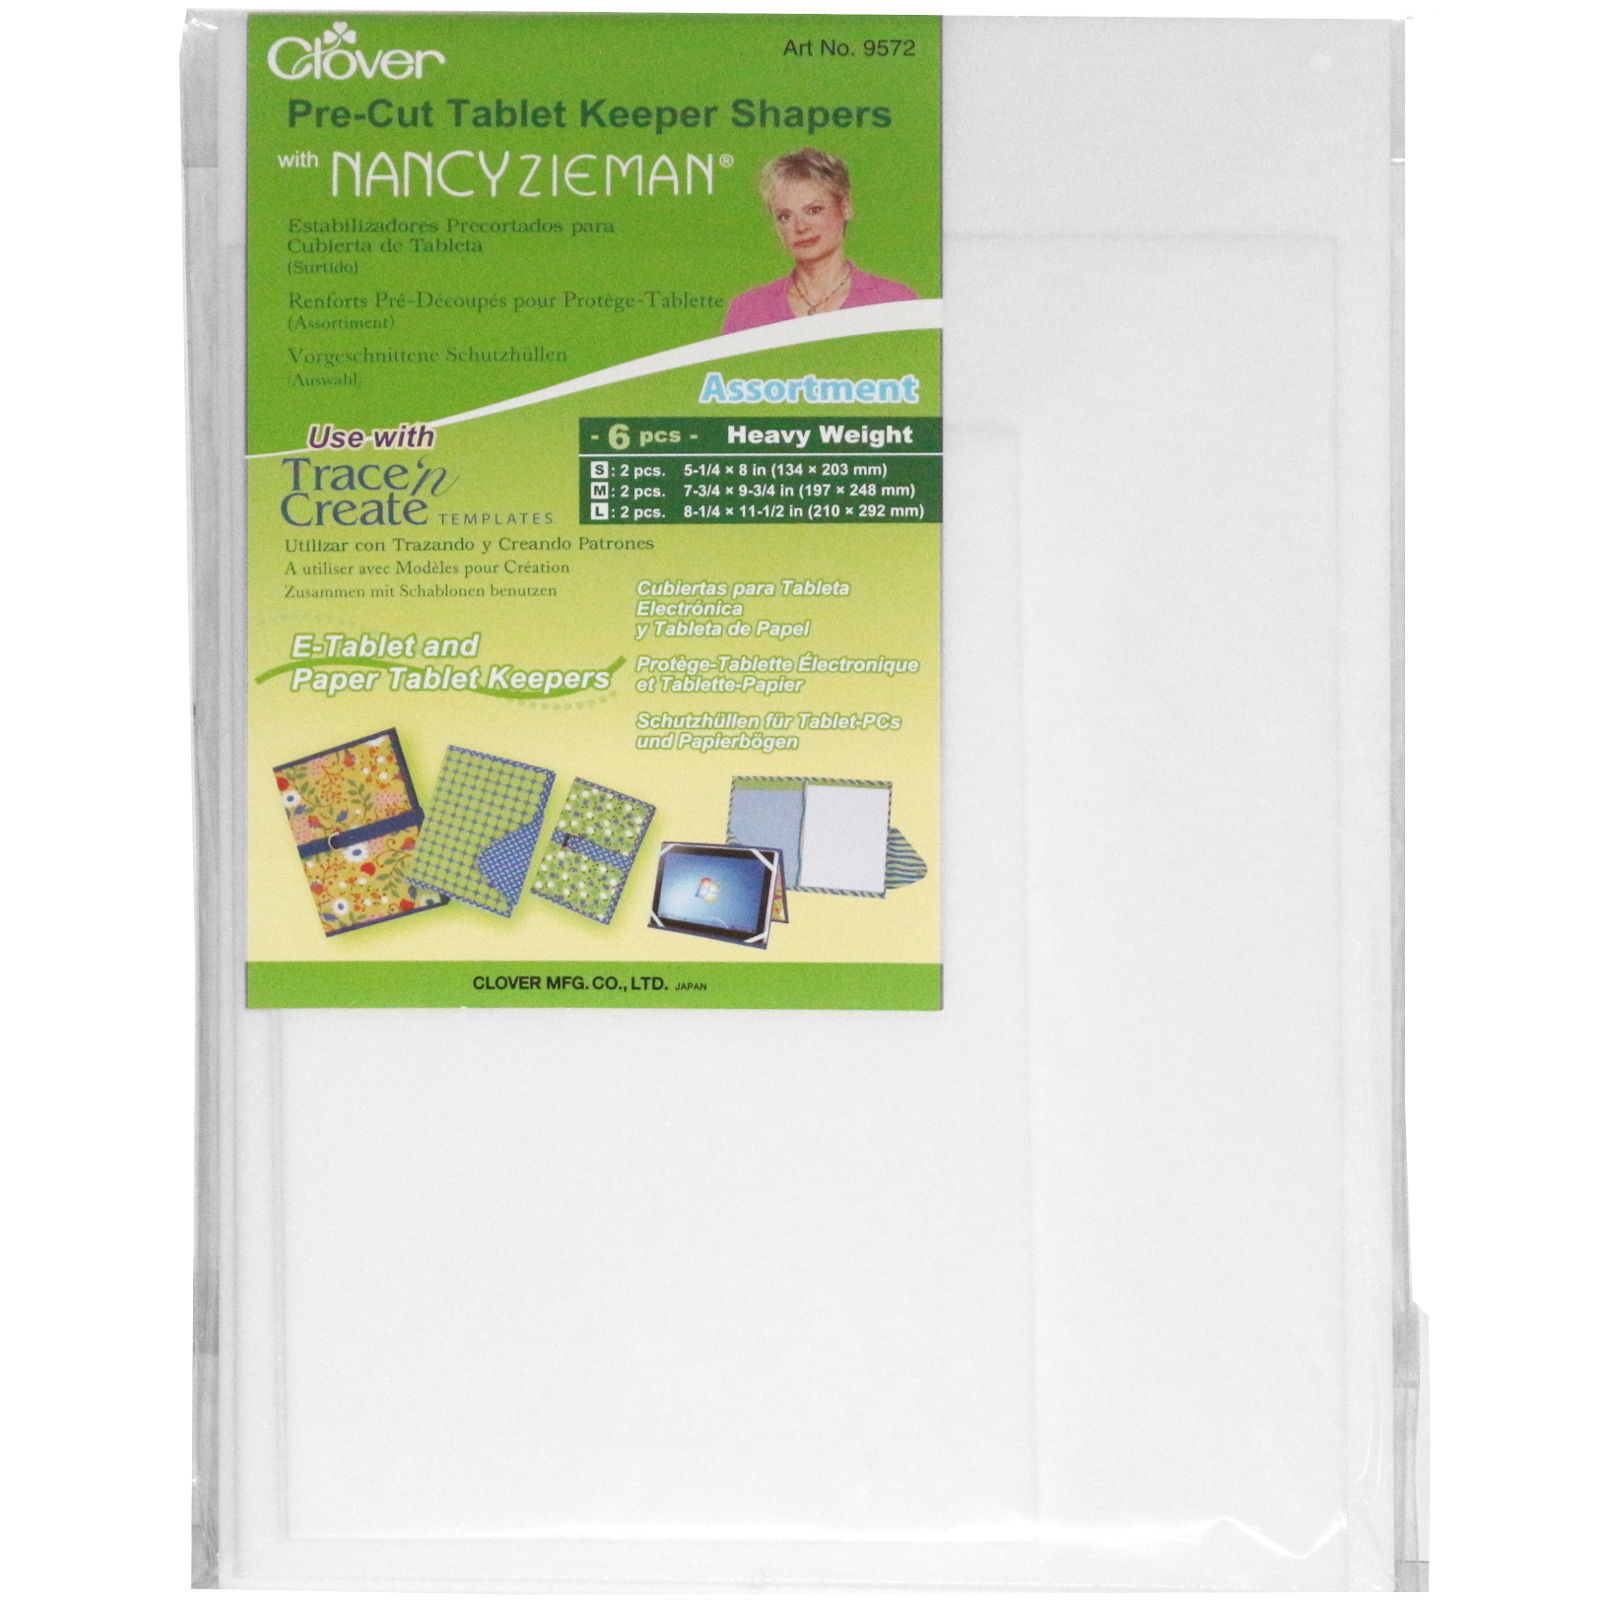 Clover Pre-Cut Tablet Keeper Shapers